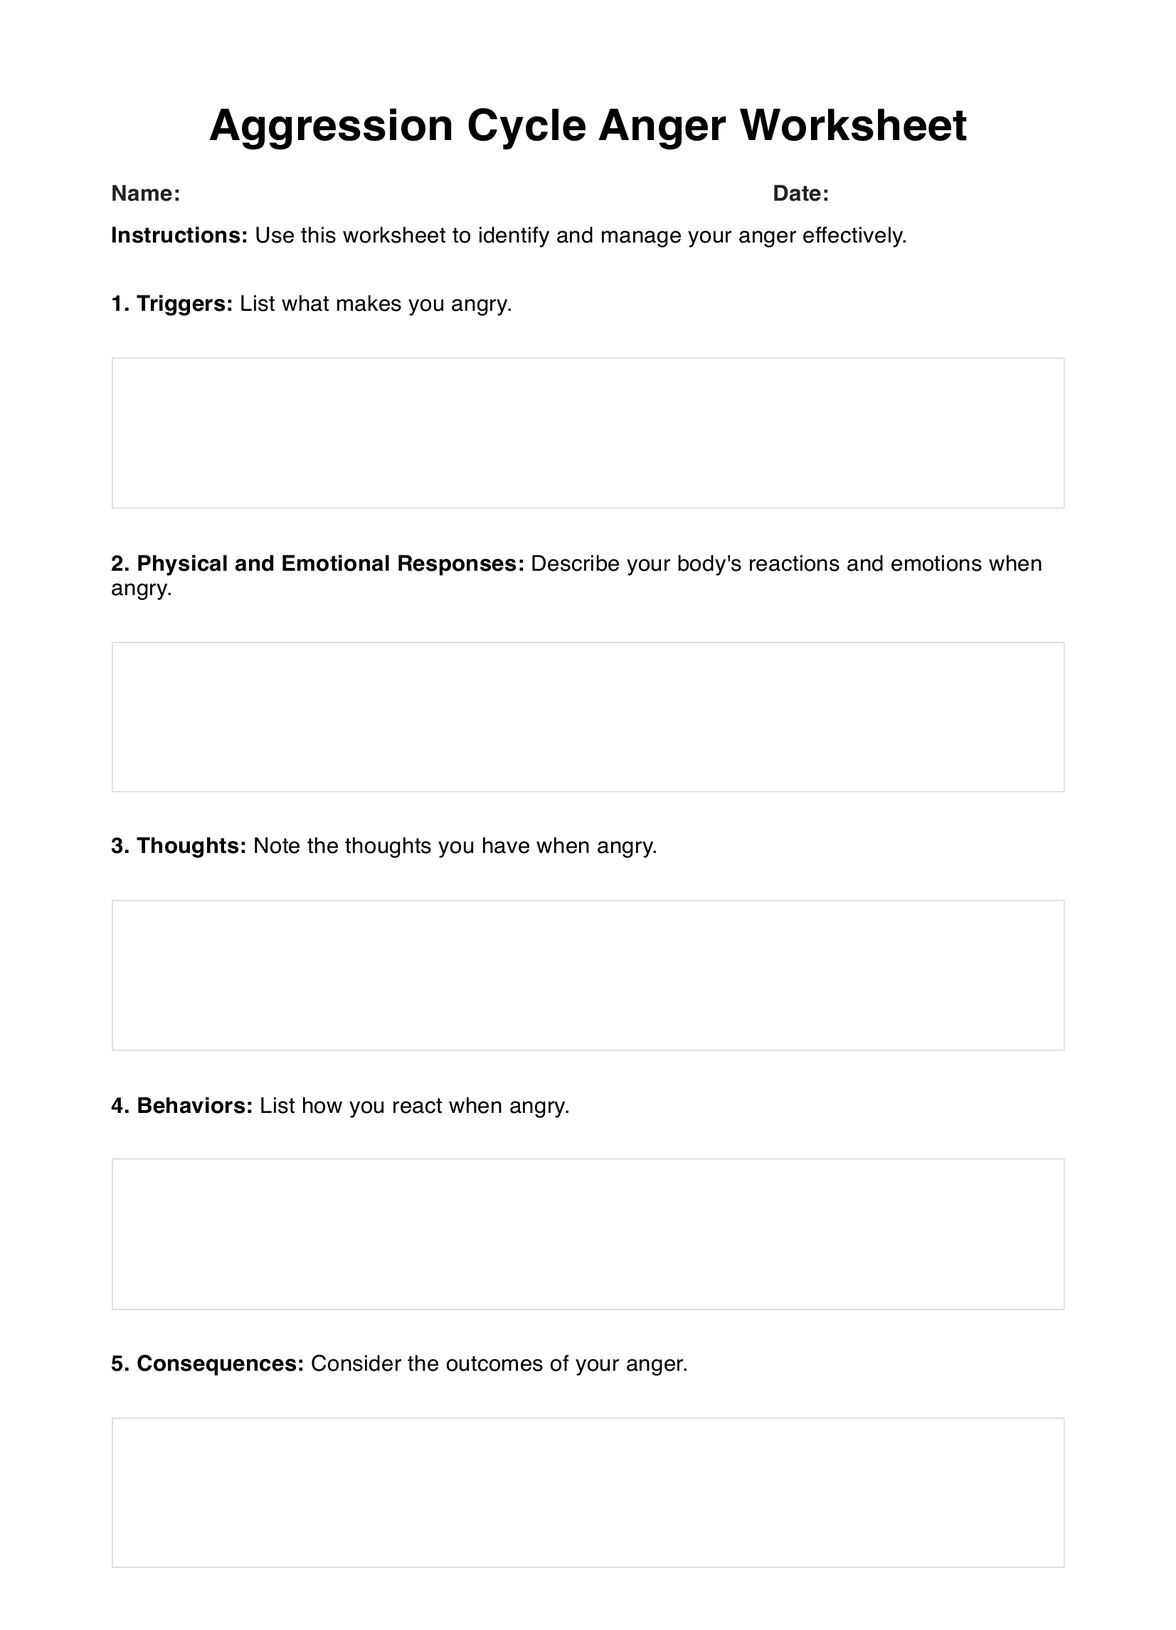 Aggression Cycle Anger Worksheet PDF Example